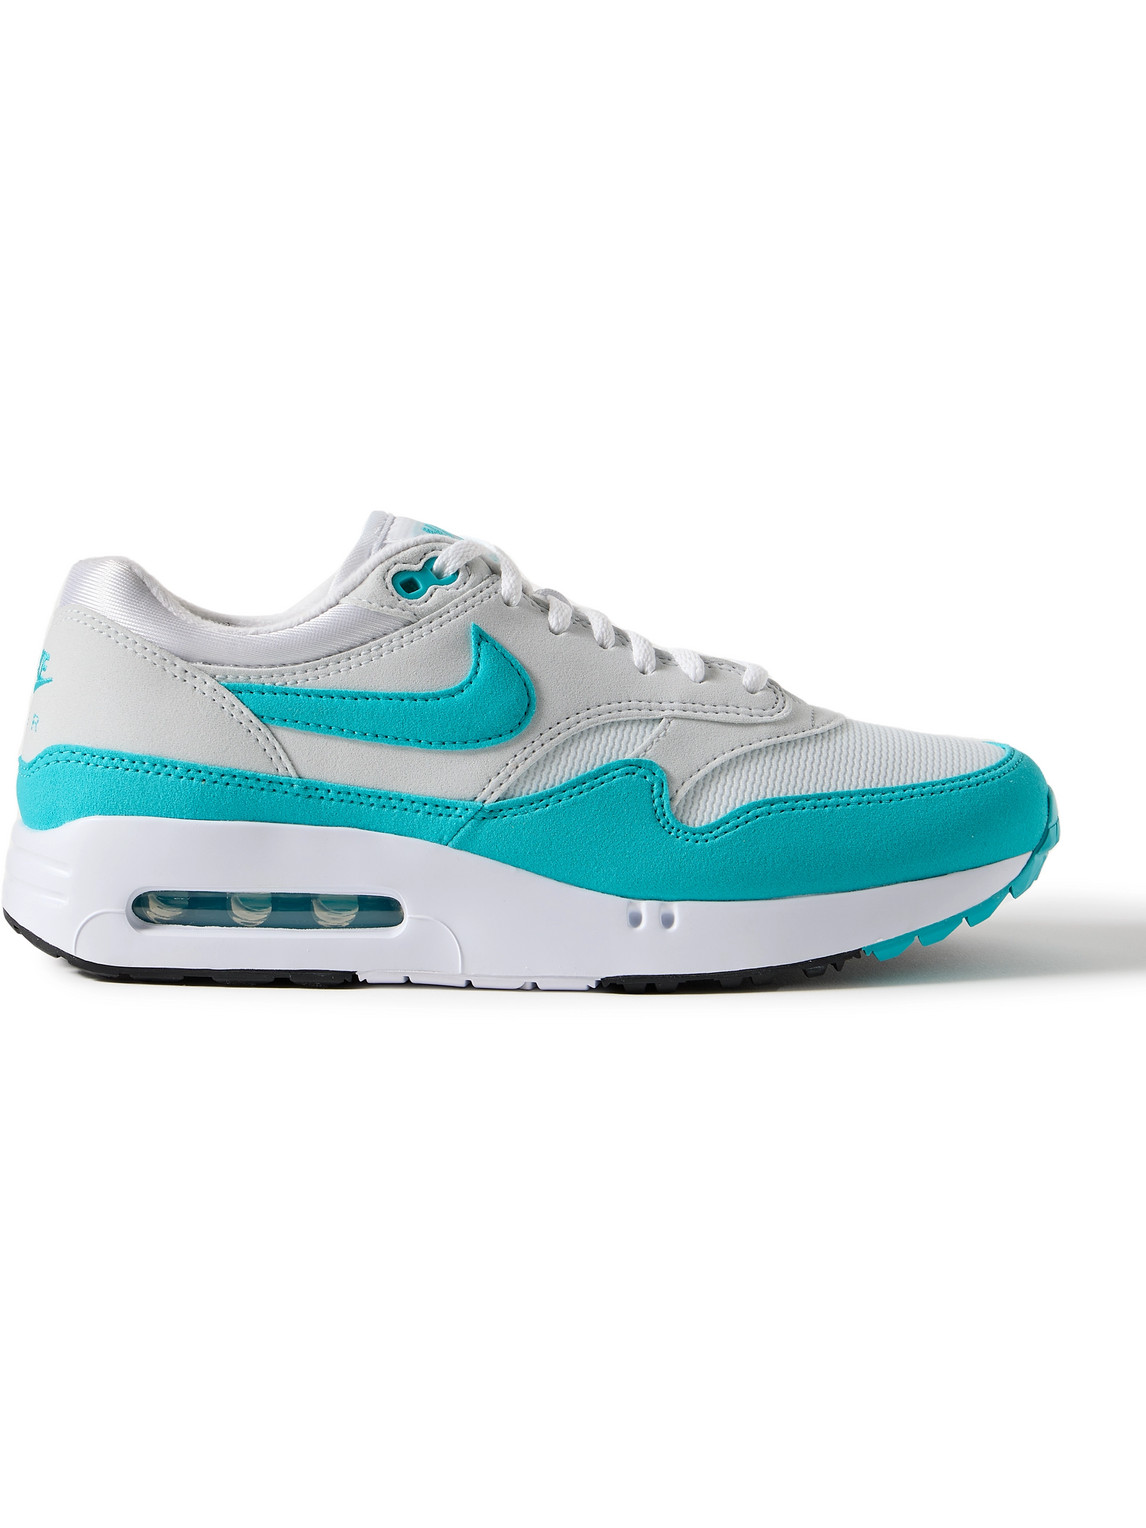 Nike Air Max 1 '86 Og G Suede And Mesh Golf Sneakers In Blue